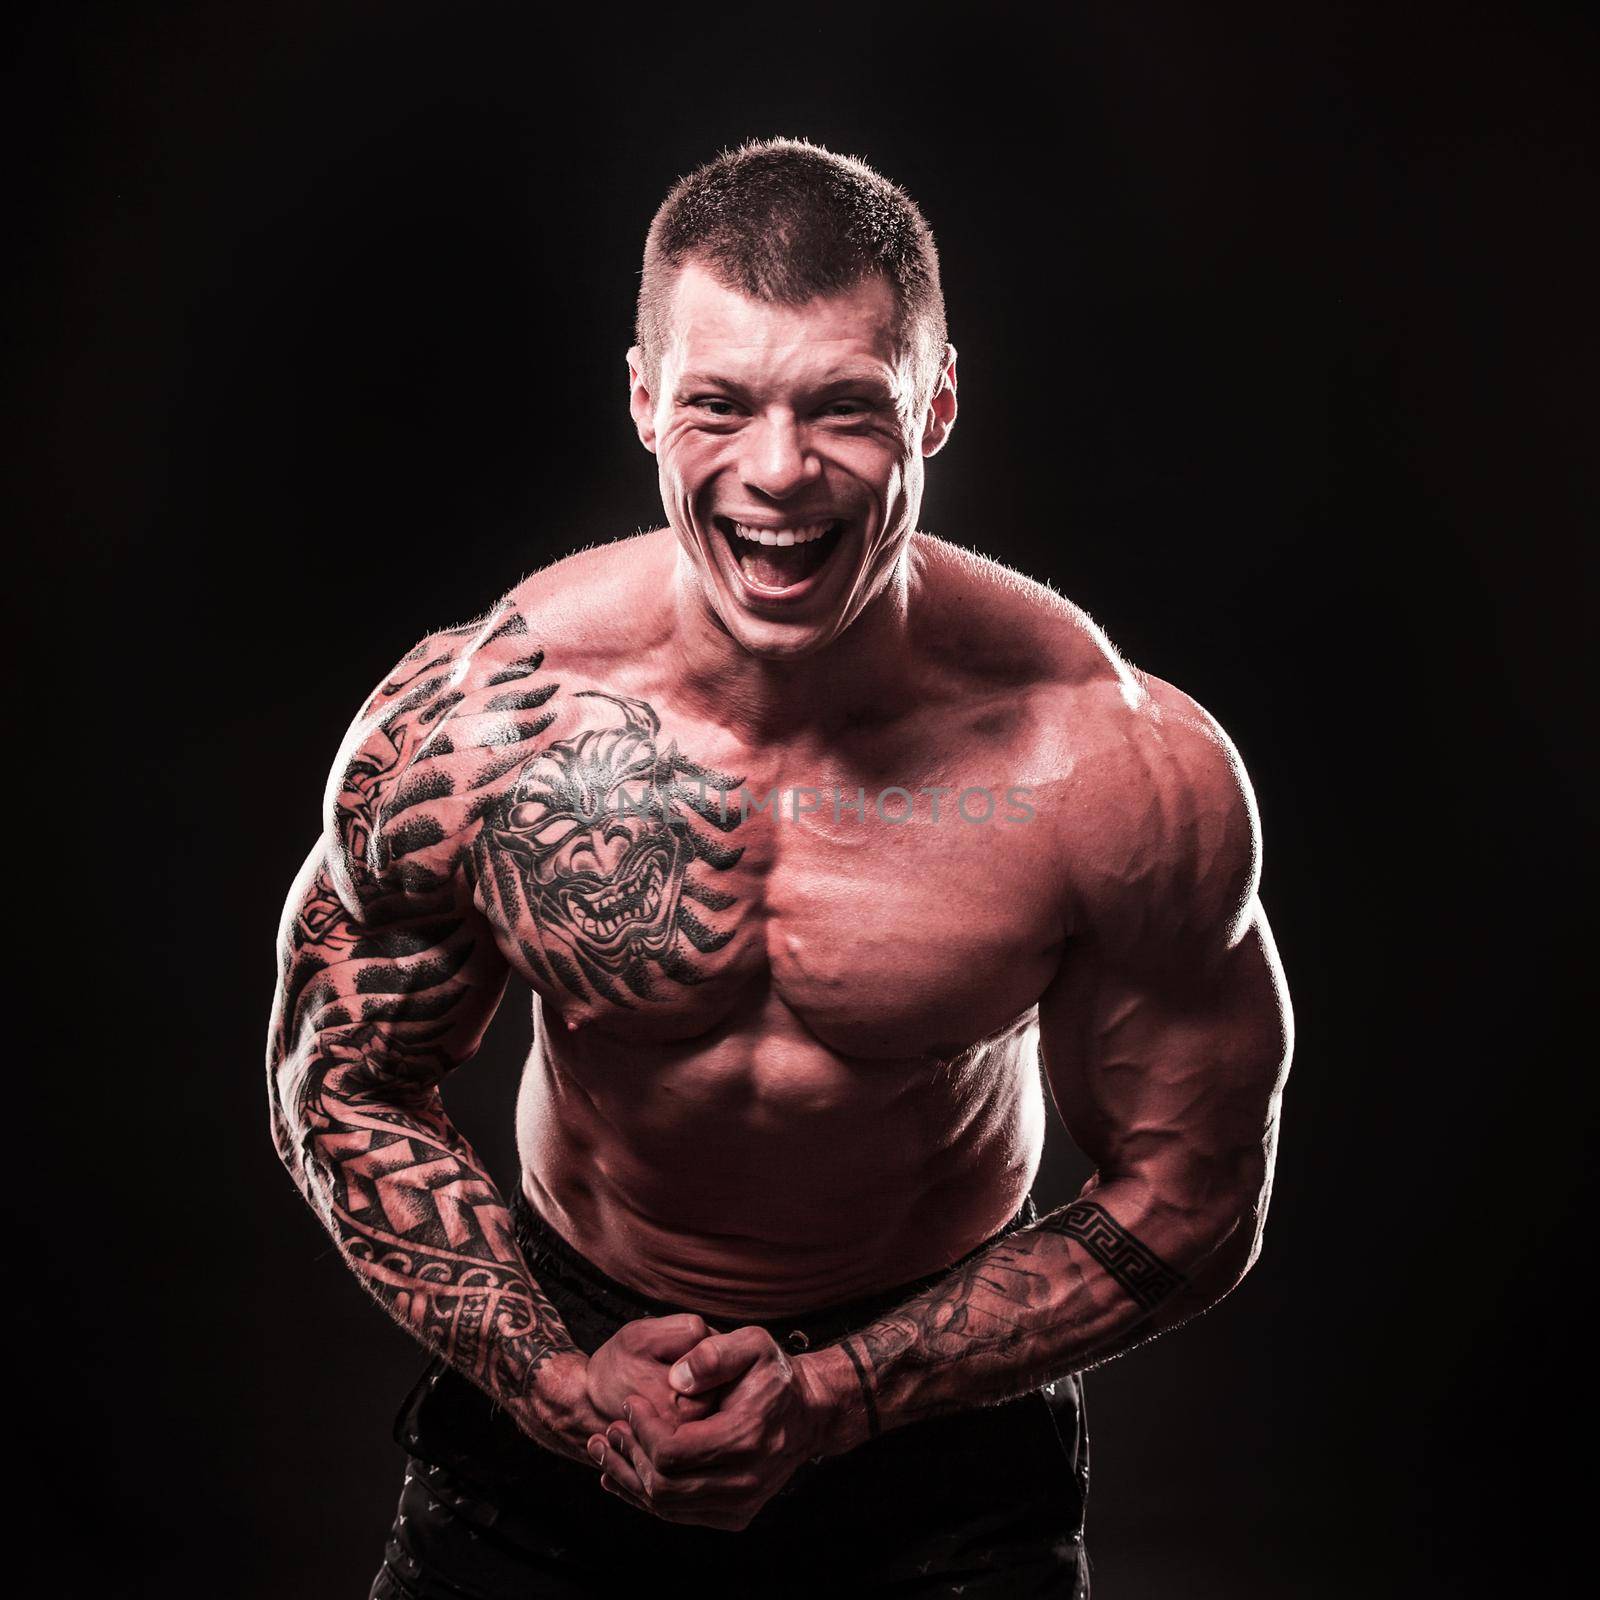 portrait of a cheerful muscular male bodybuilder by SmartPhotoLab